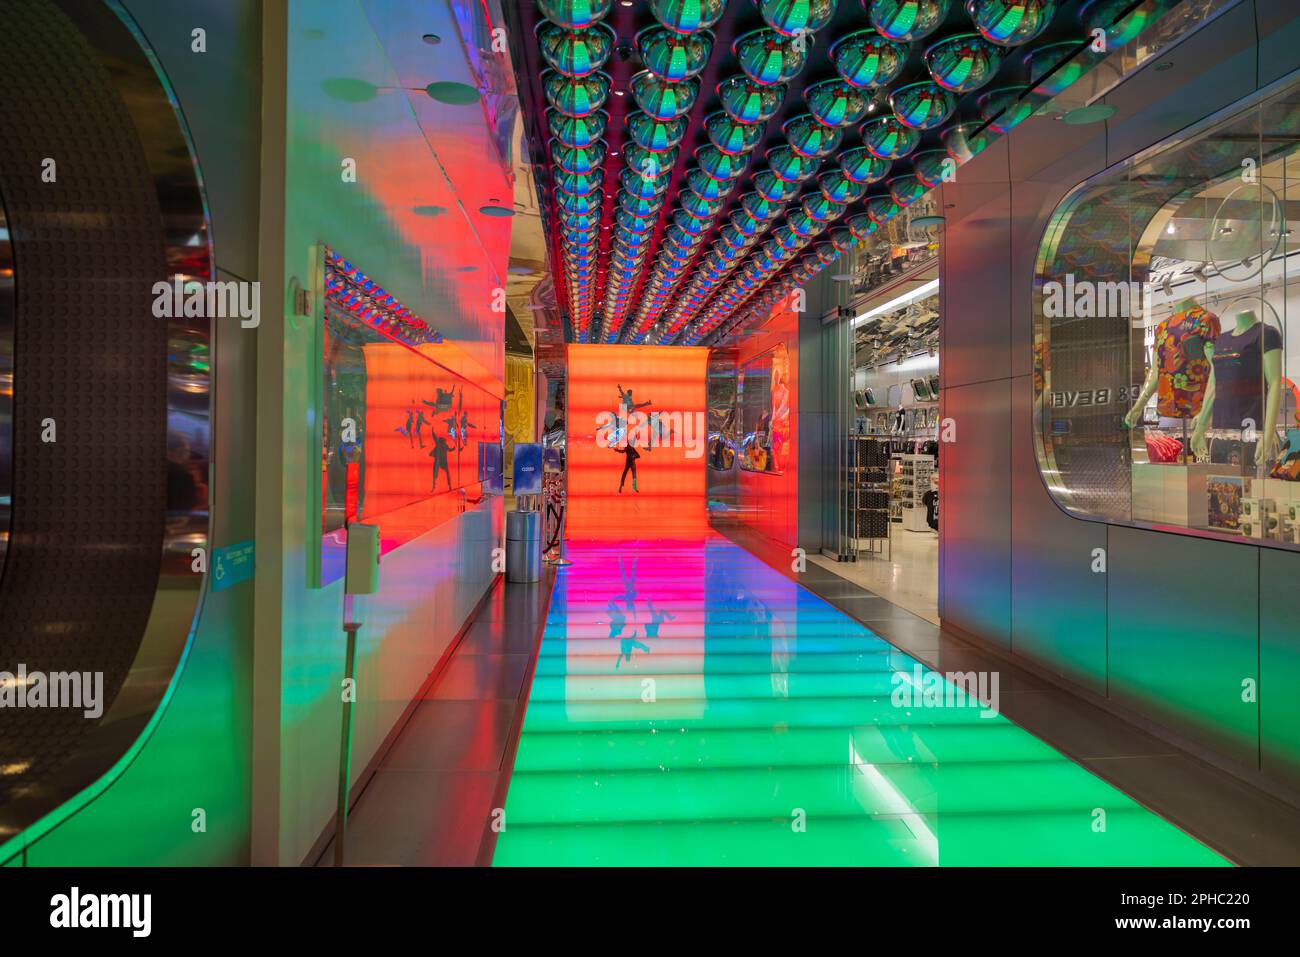 Beautiful view of colorful illuminated floor in Beatles store at casino hotel in Las Vegas. Concept of modern technology. Las Vegas, Nevada, USA. Stock Photo